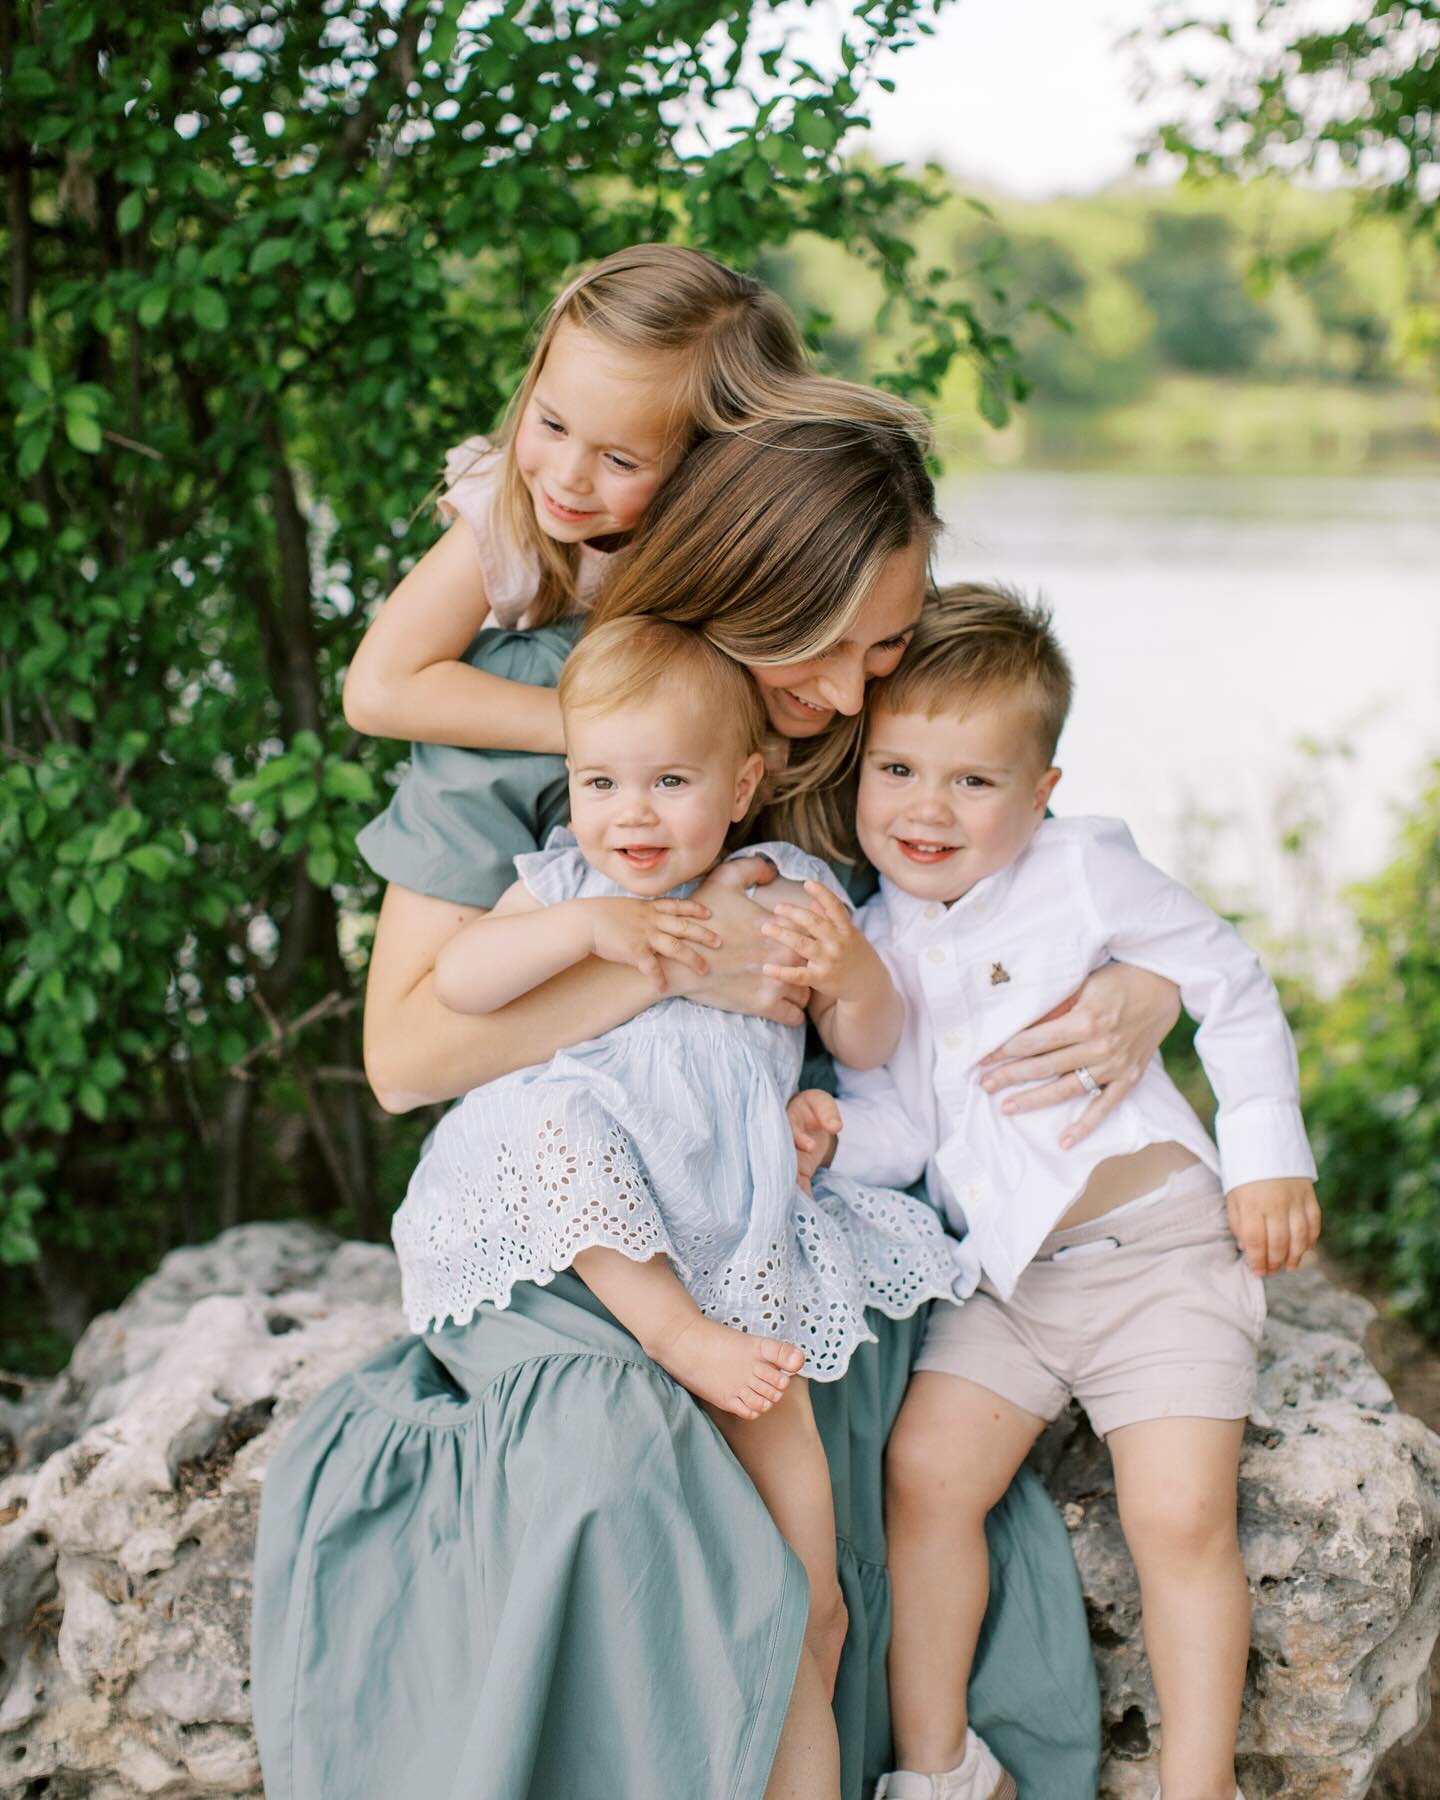 I will never get over these beautiful spring colors and my beautiful clients 🥰 loved getting to catch up with this sweet family&hellip; cannot believe how fast time is going by.